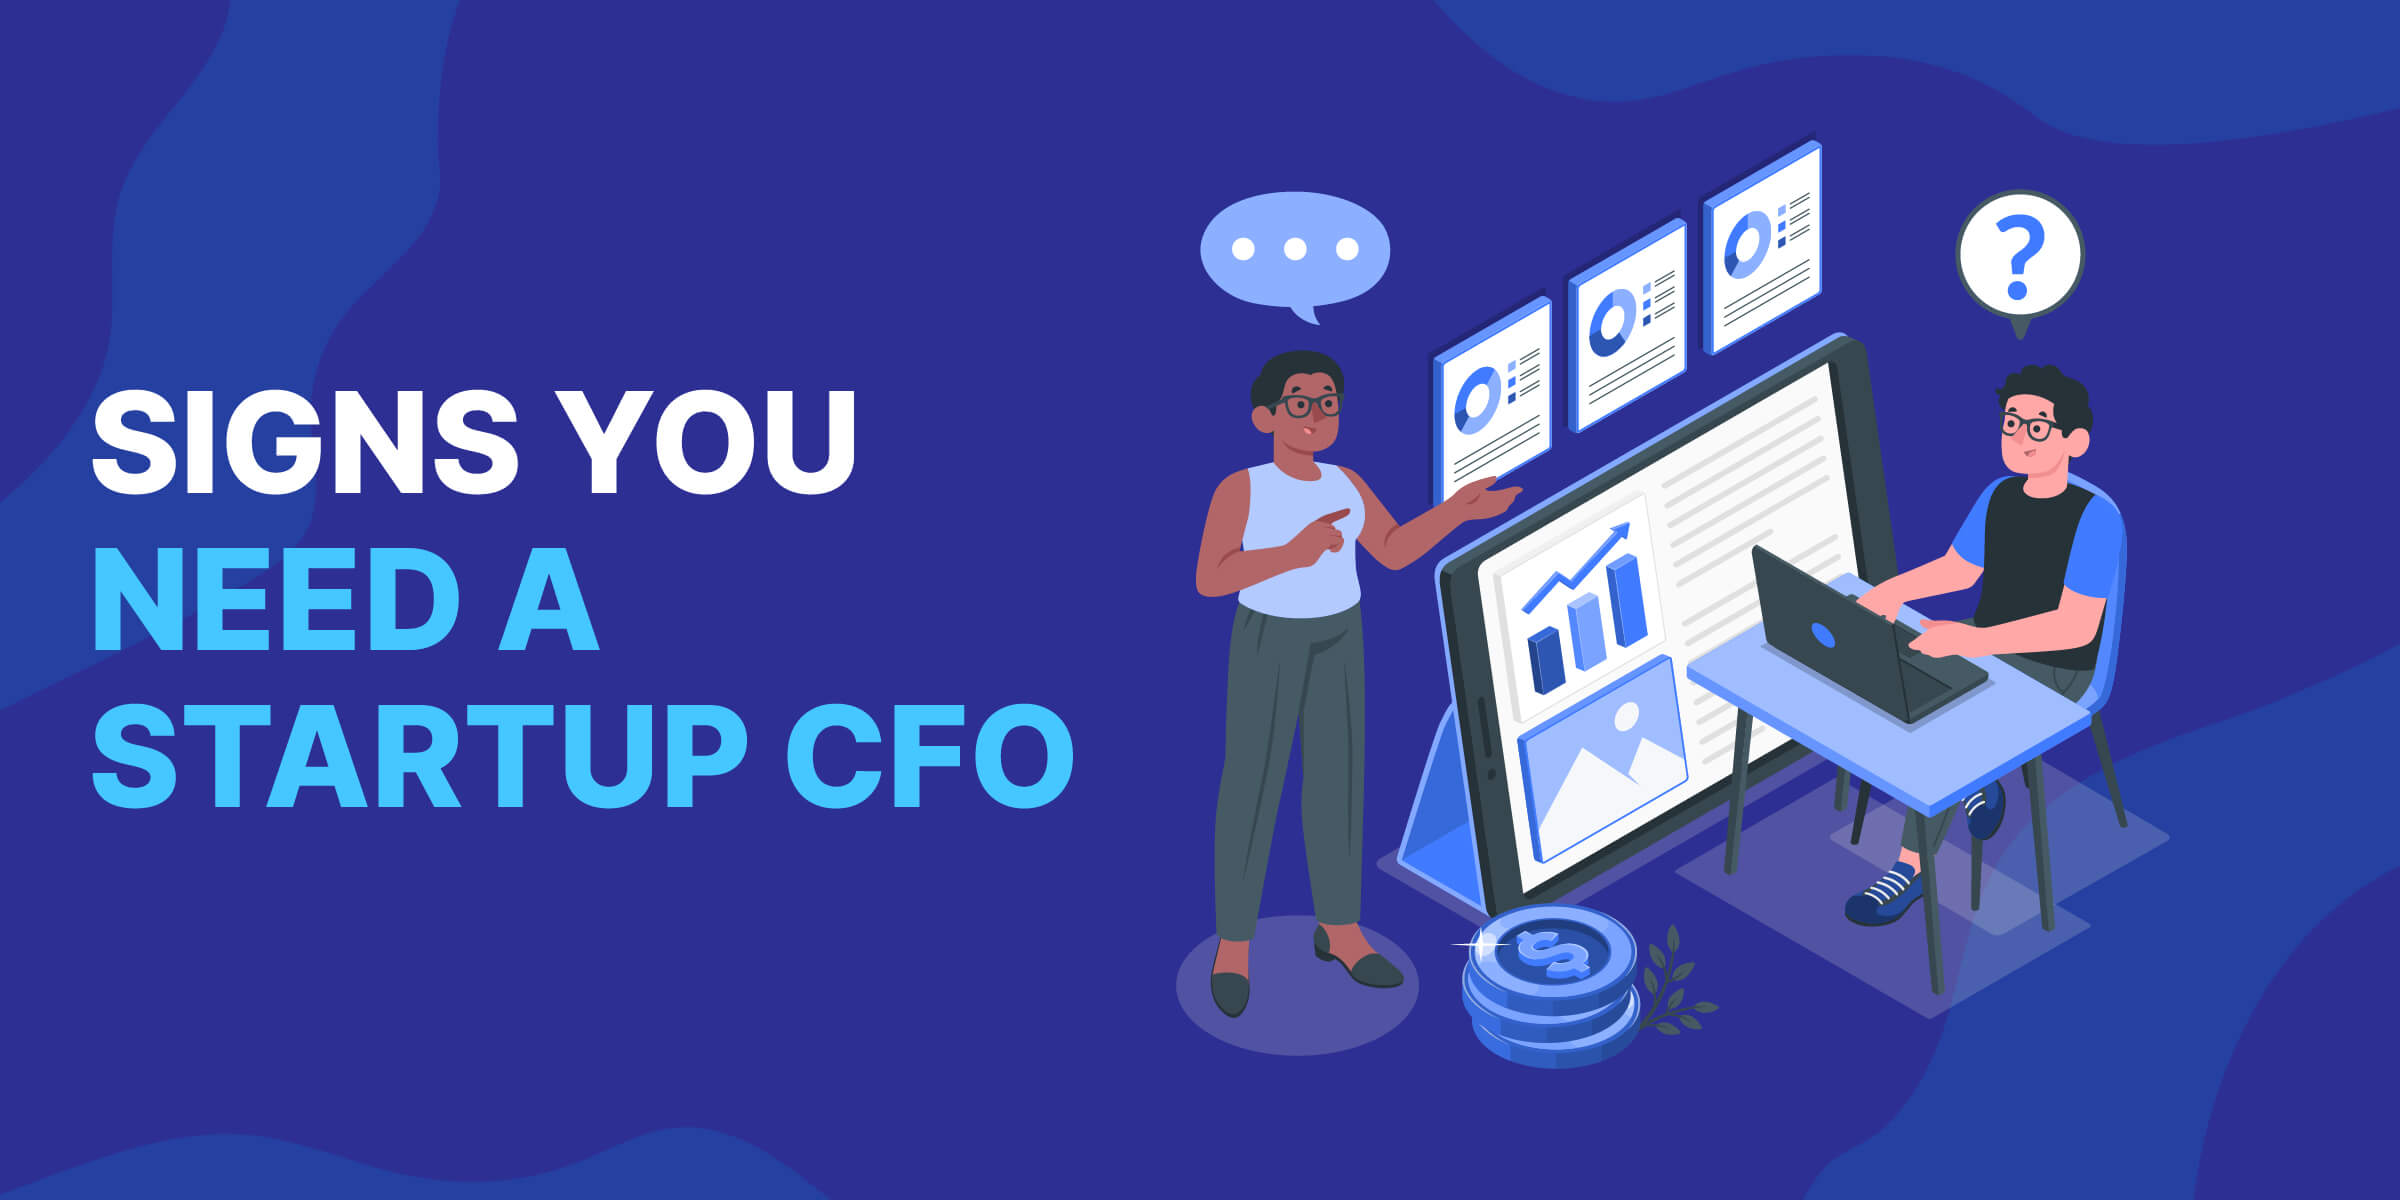 Signs You Need a Startup CFO